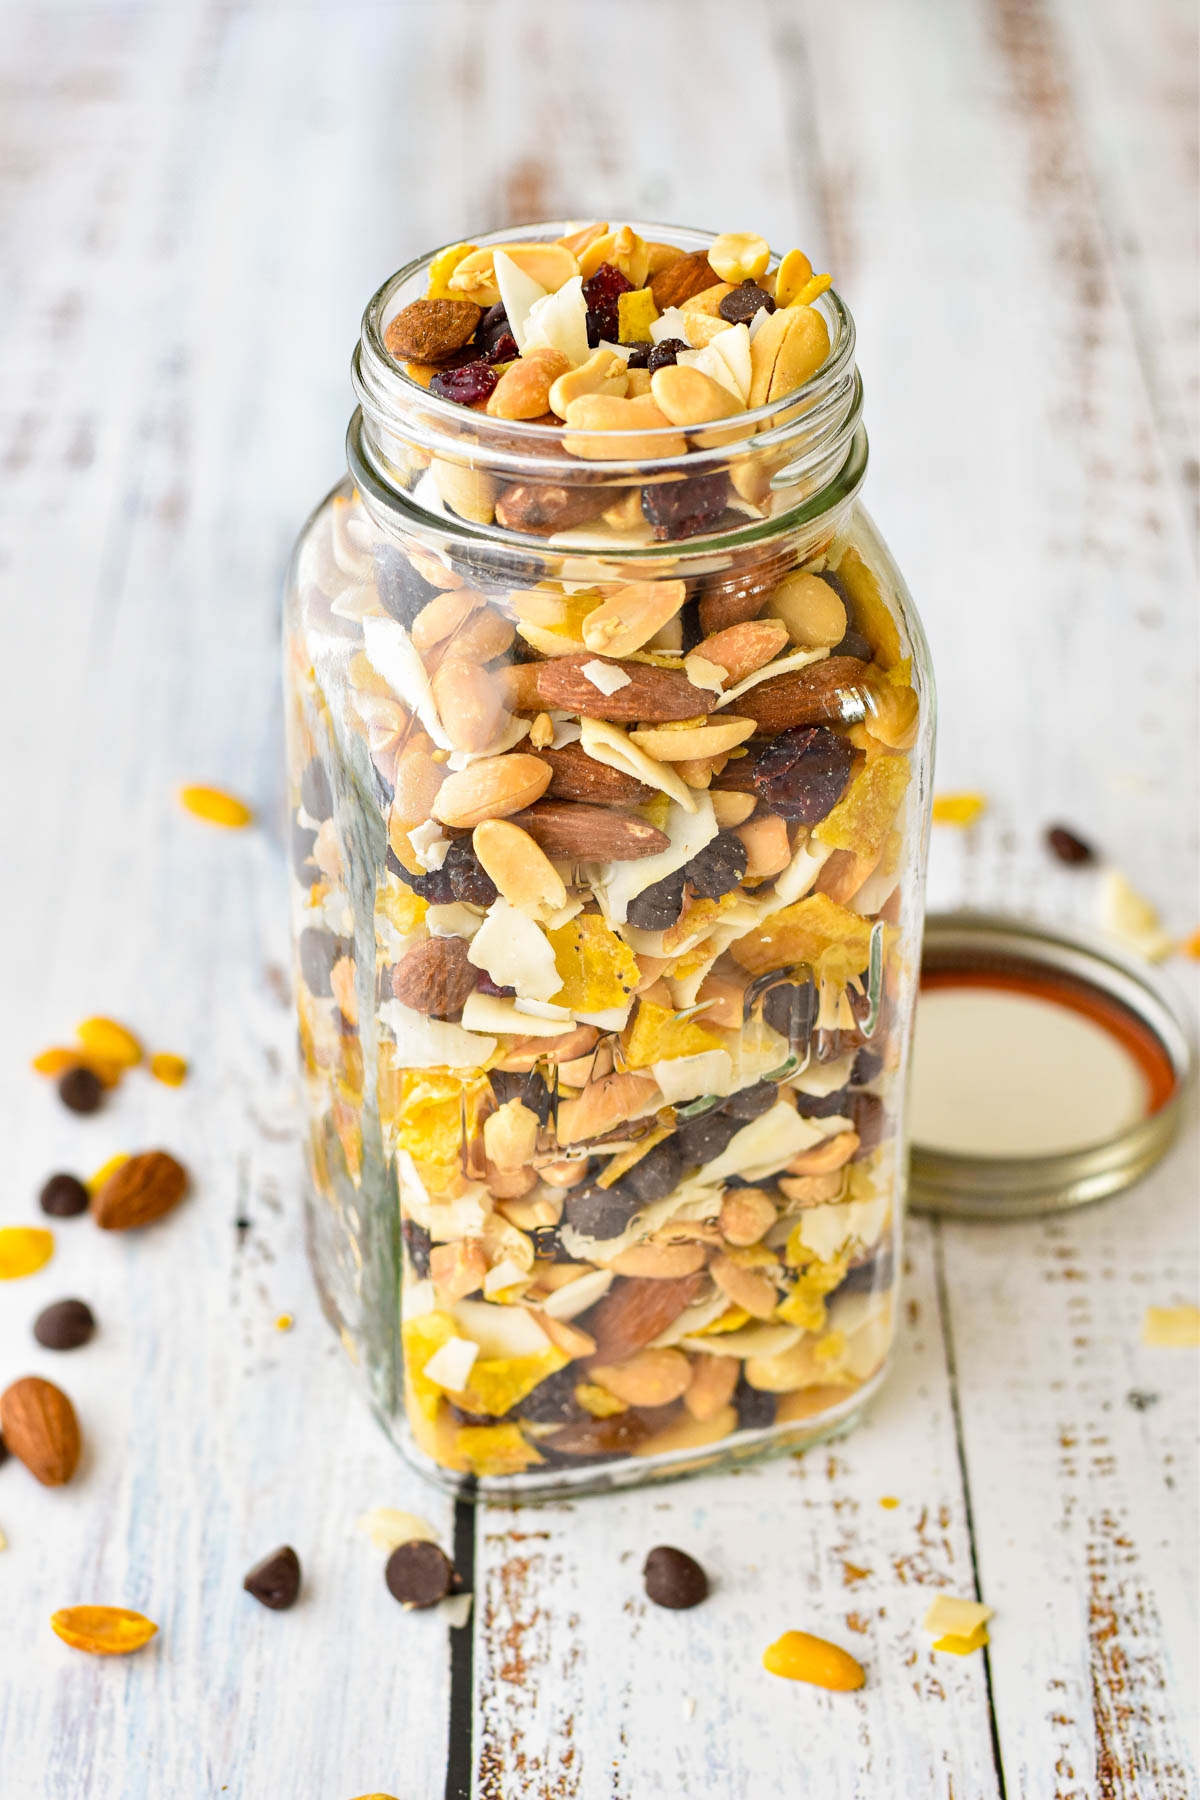 low fodmap trail mix with peanuts, almonds, coconut chips, plantain chips, raisins, dried cranberries and dark chocolate chips in a jar